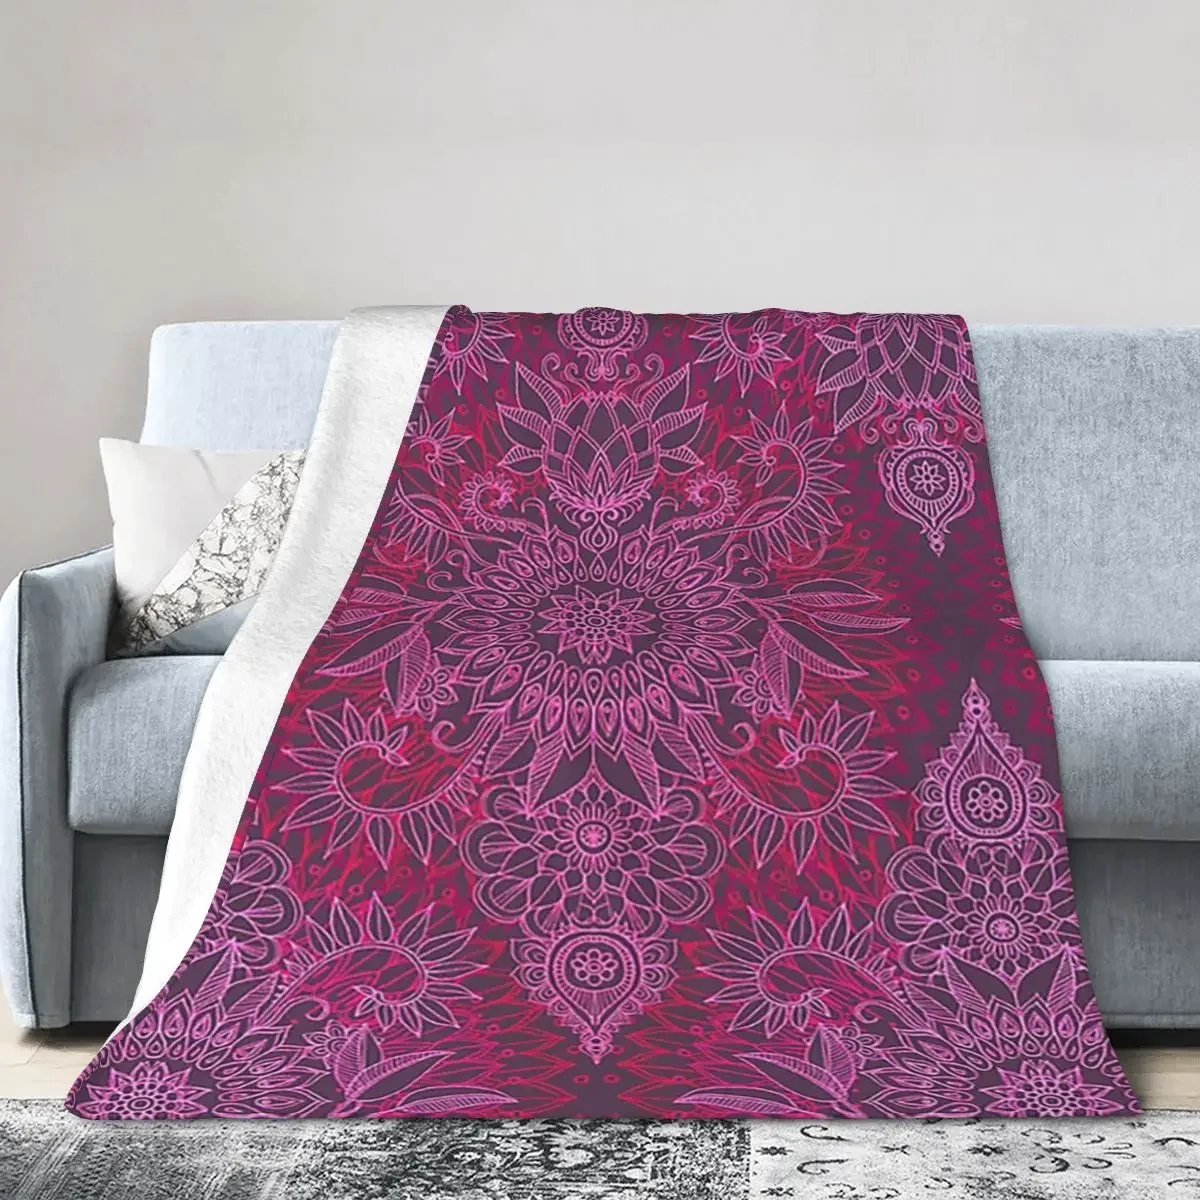 

Magenta, Pink & Coral Protea Doodle Pattern Blanket Soft Warm Flannel Throw Blanket Cover for Bed Living room Picnic Travel Home